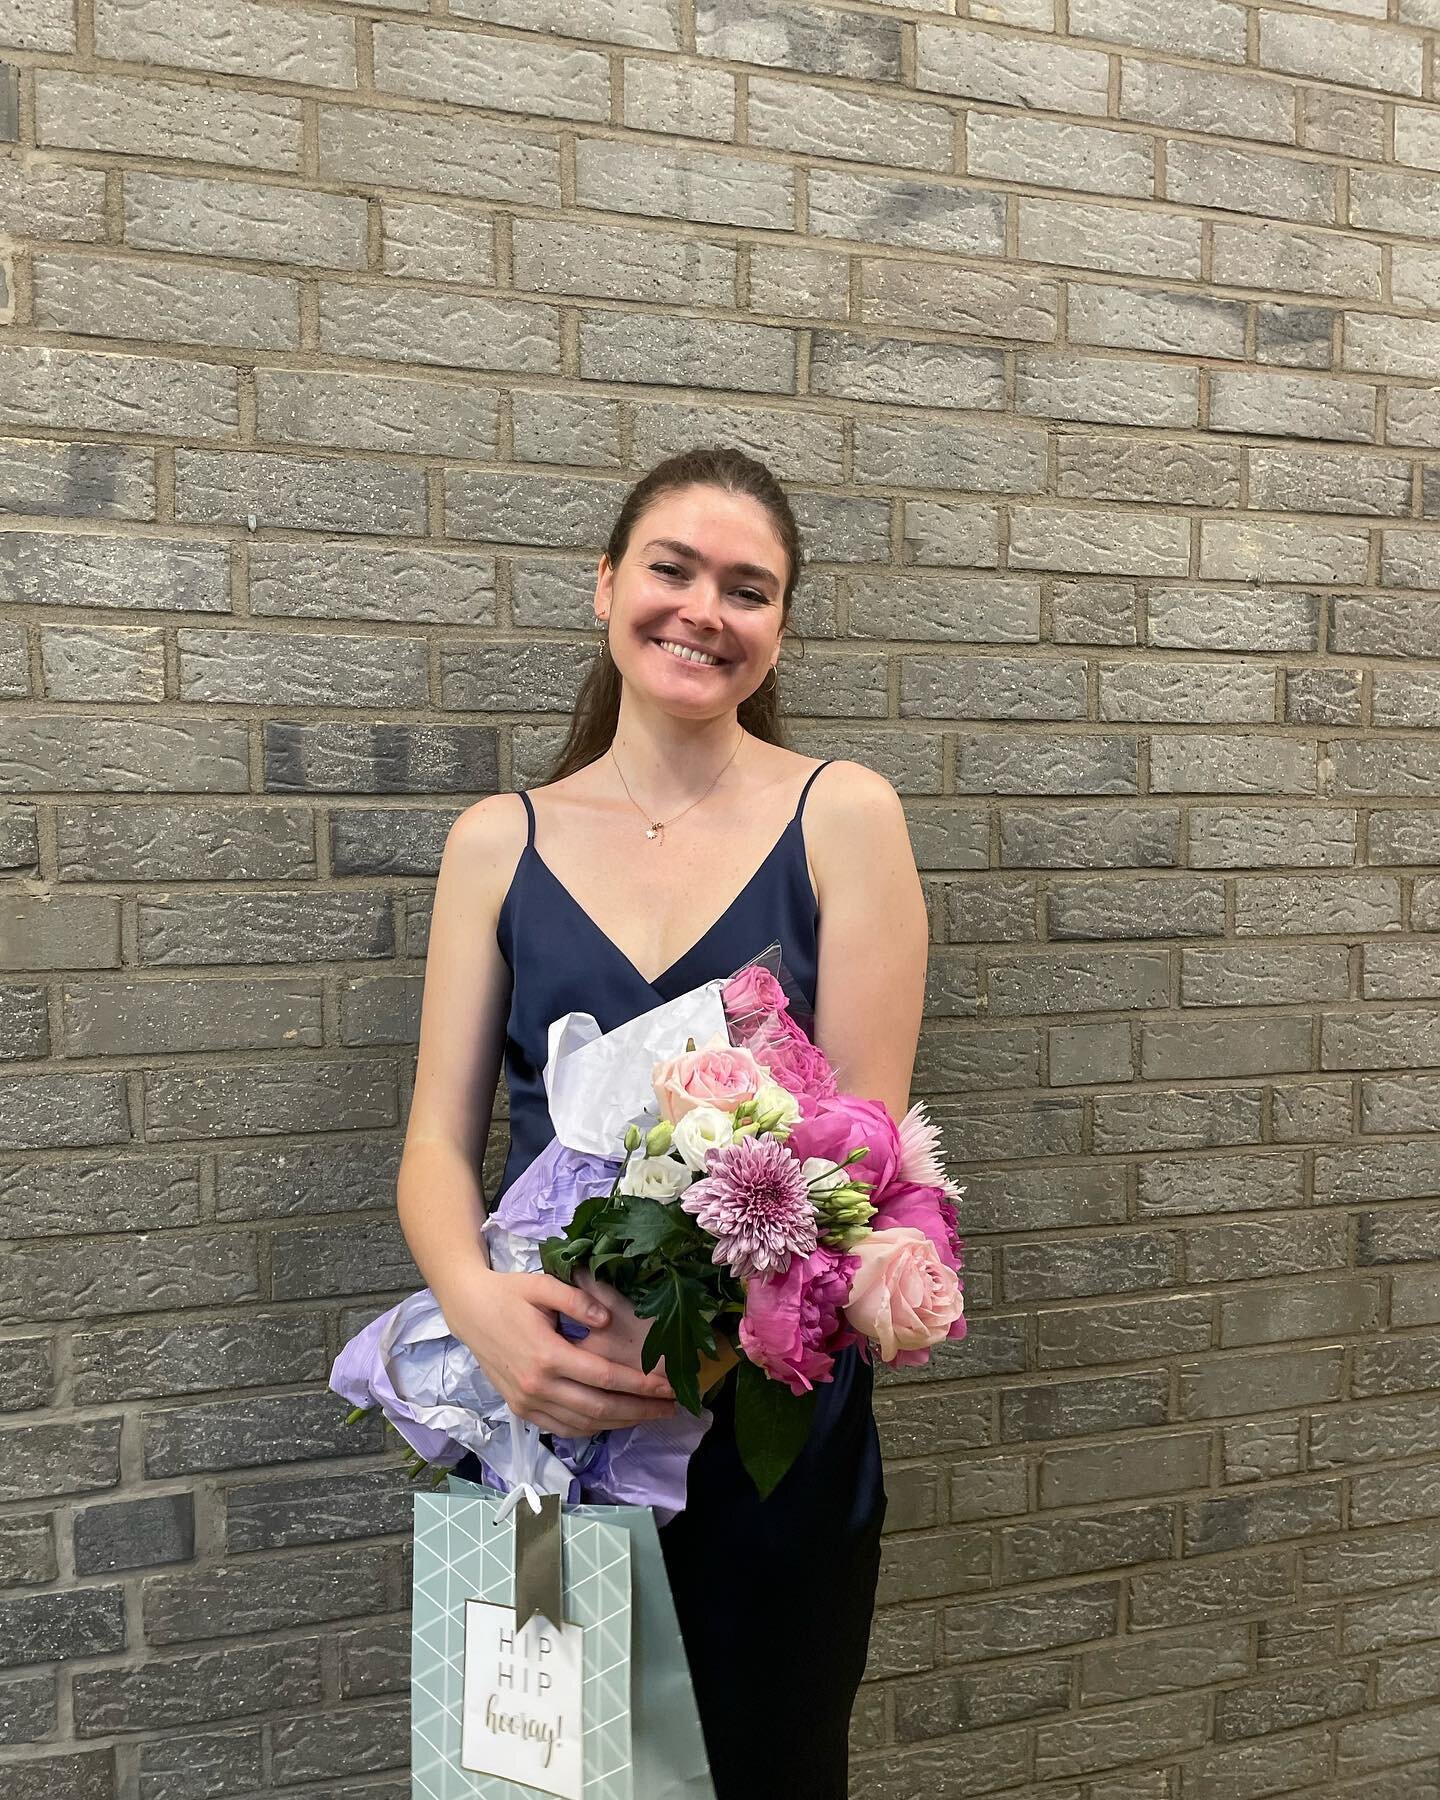 It seems I am now a Master of Piano?👩🏻&zwj;🎓

Thank you to everyone that came to support and listen❤️ what a privilege it is to play for the closest people in my life, looking forward to many more years of concerts and flowers💐